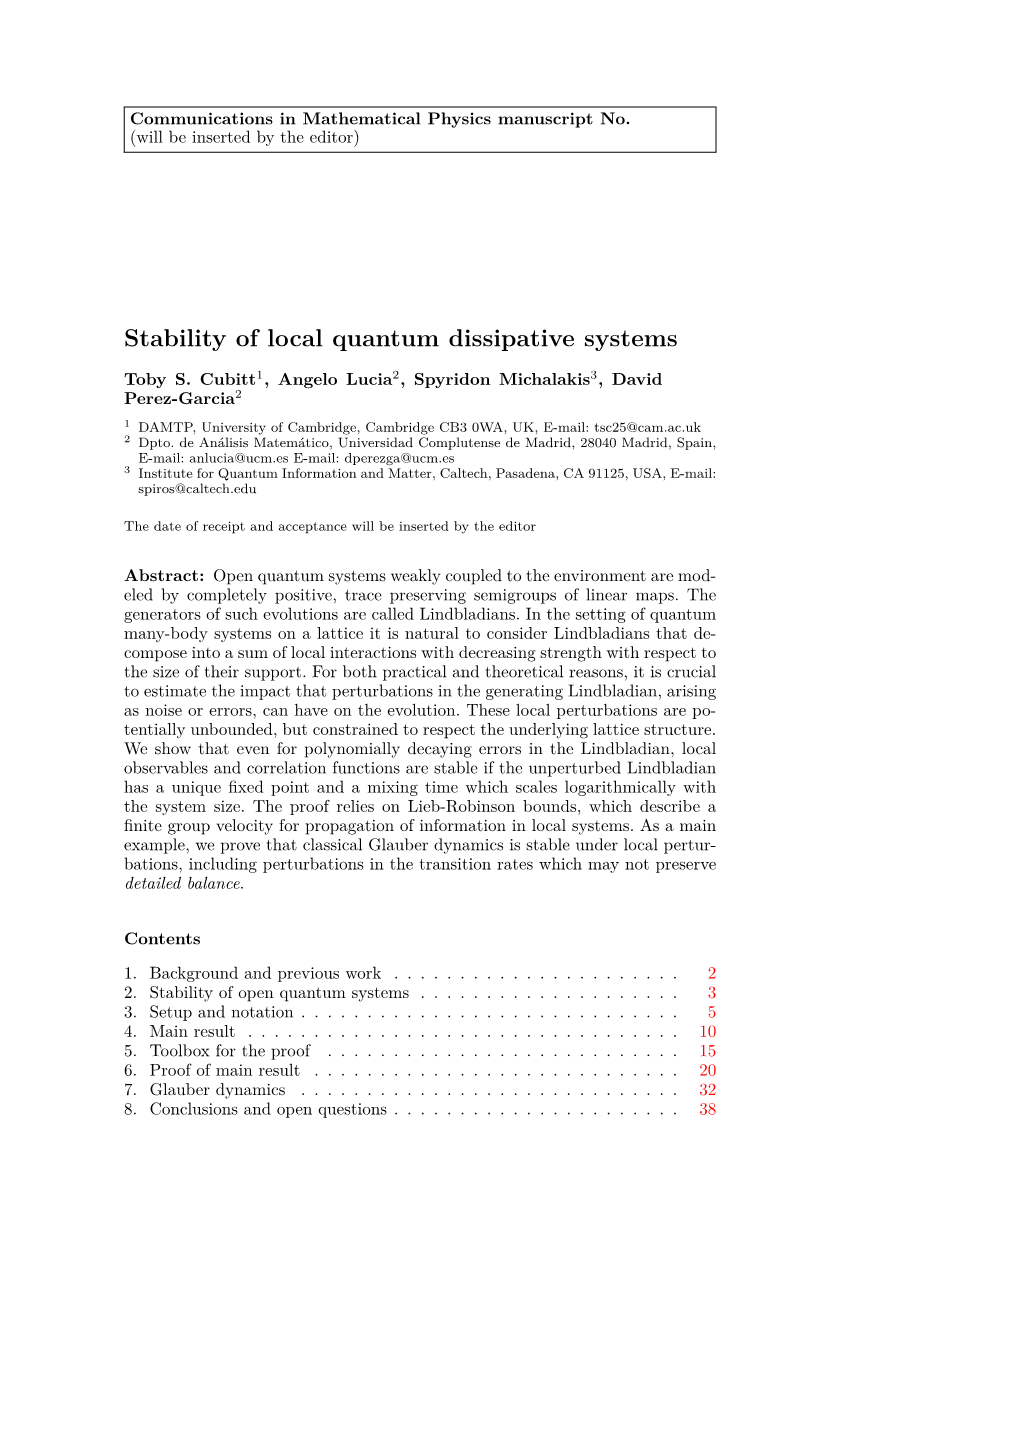 Stability of Local Quantum Dissipative Systems